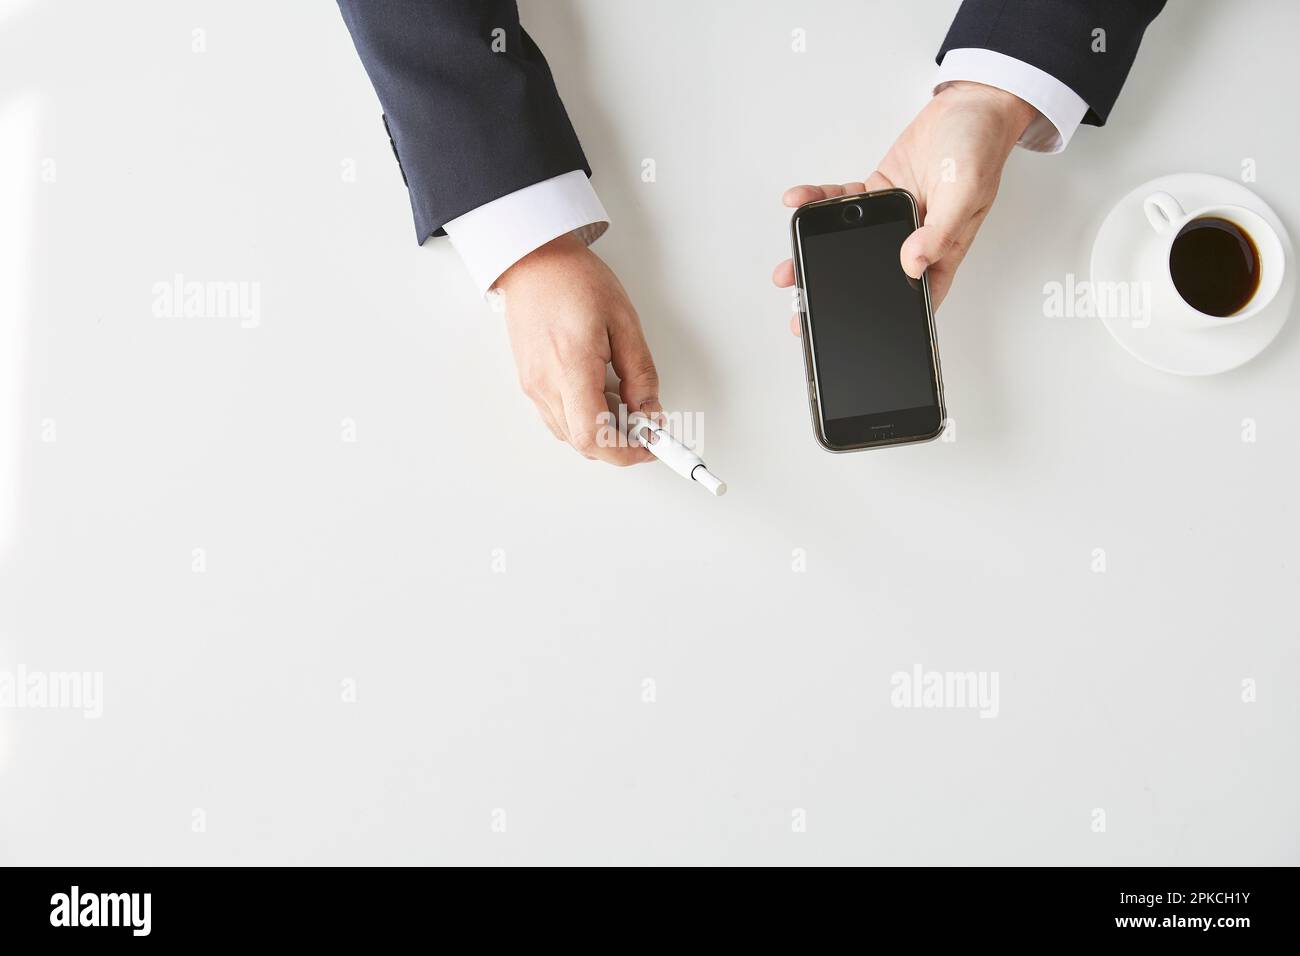 Male in suit with e-cigarette and smartphone in hand Stock Photo